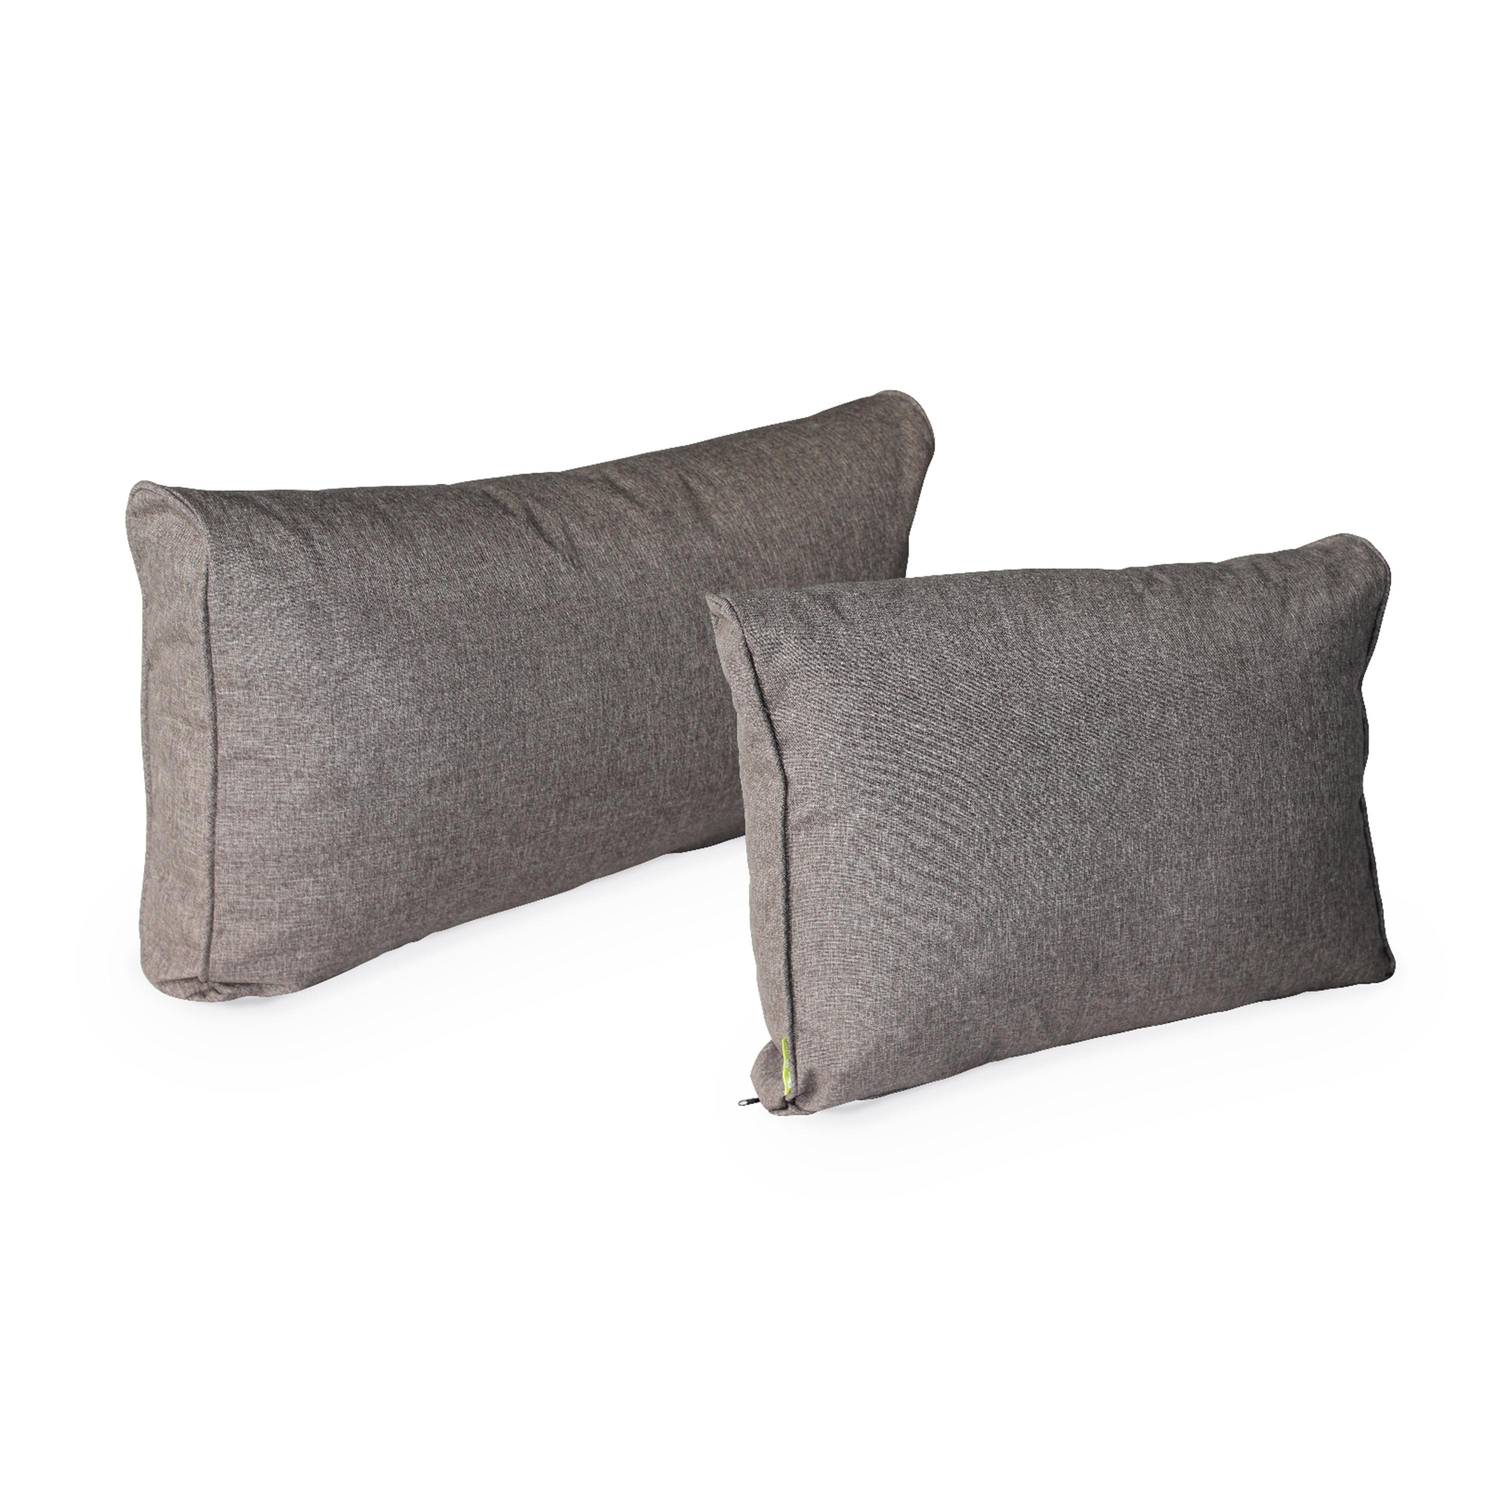 Complete set of cushion covers - Caligari - Heather Grey Photo2